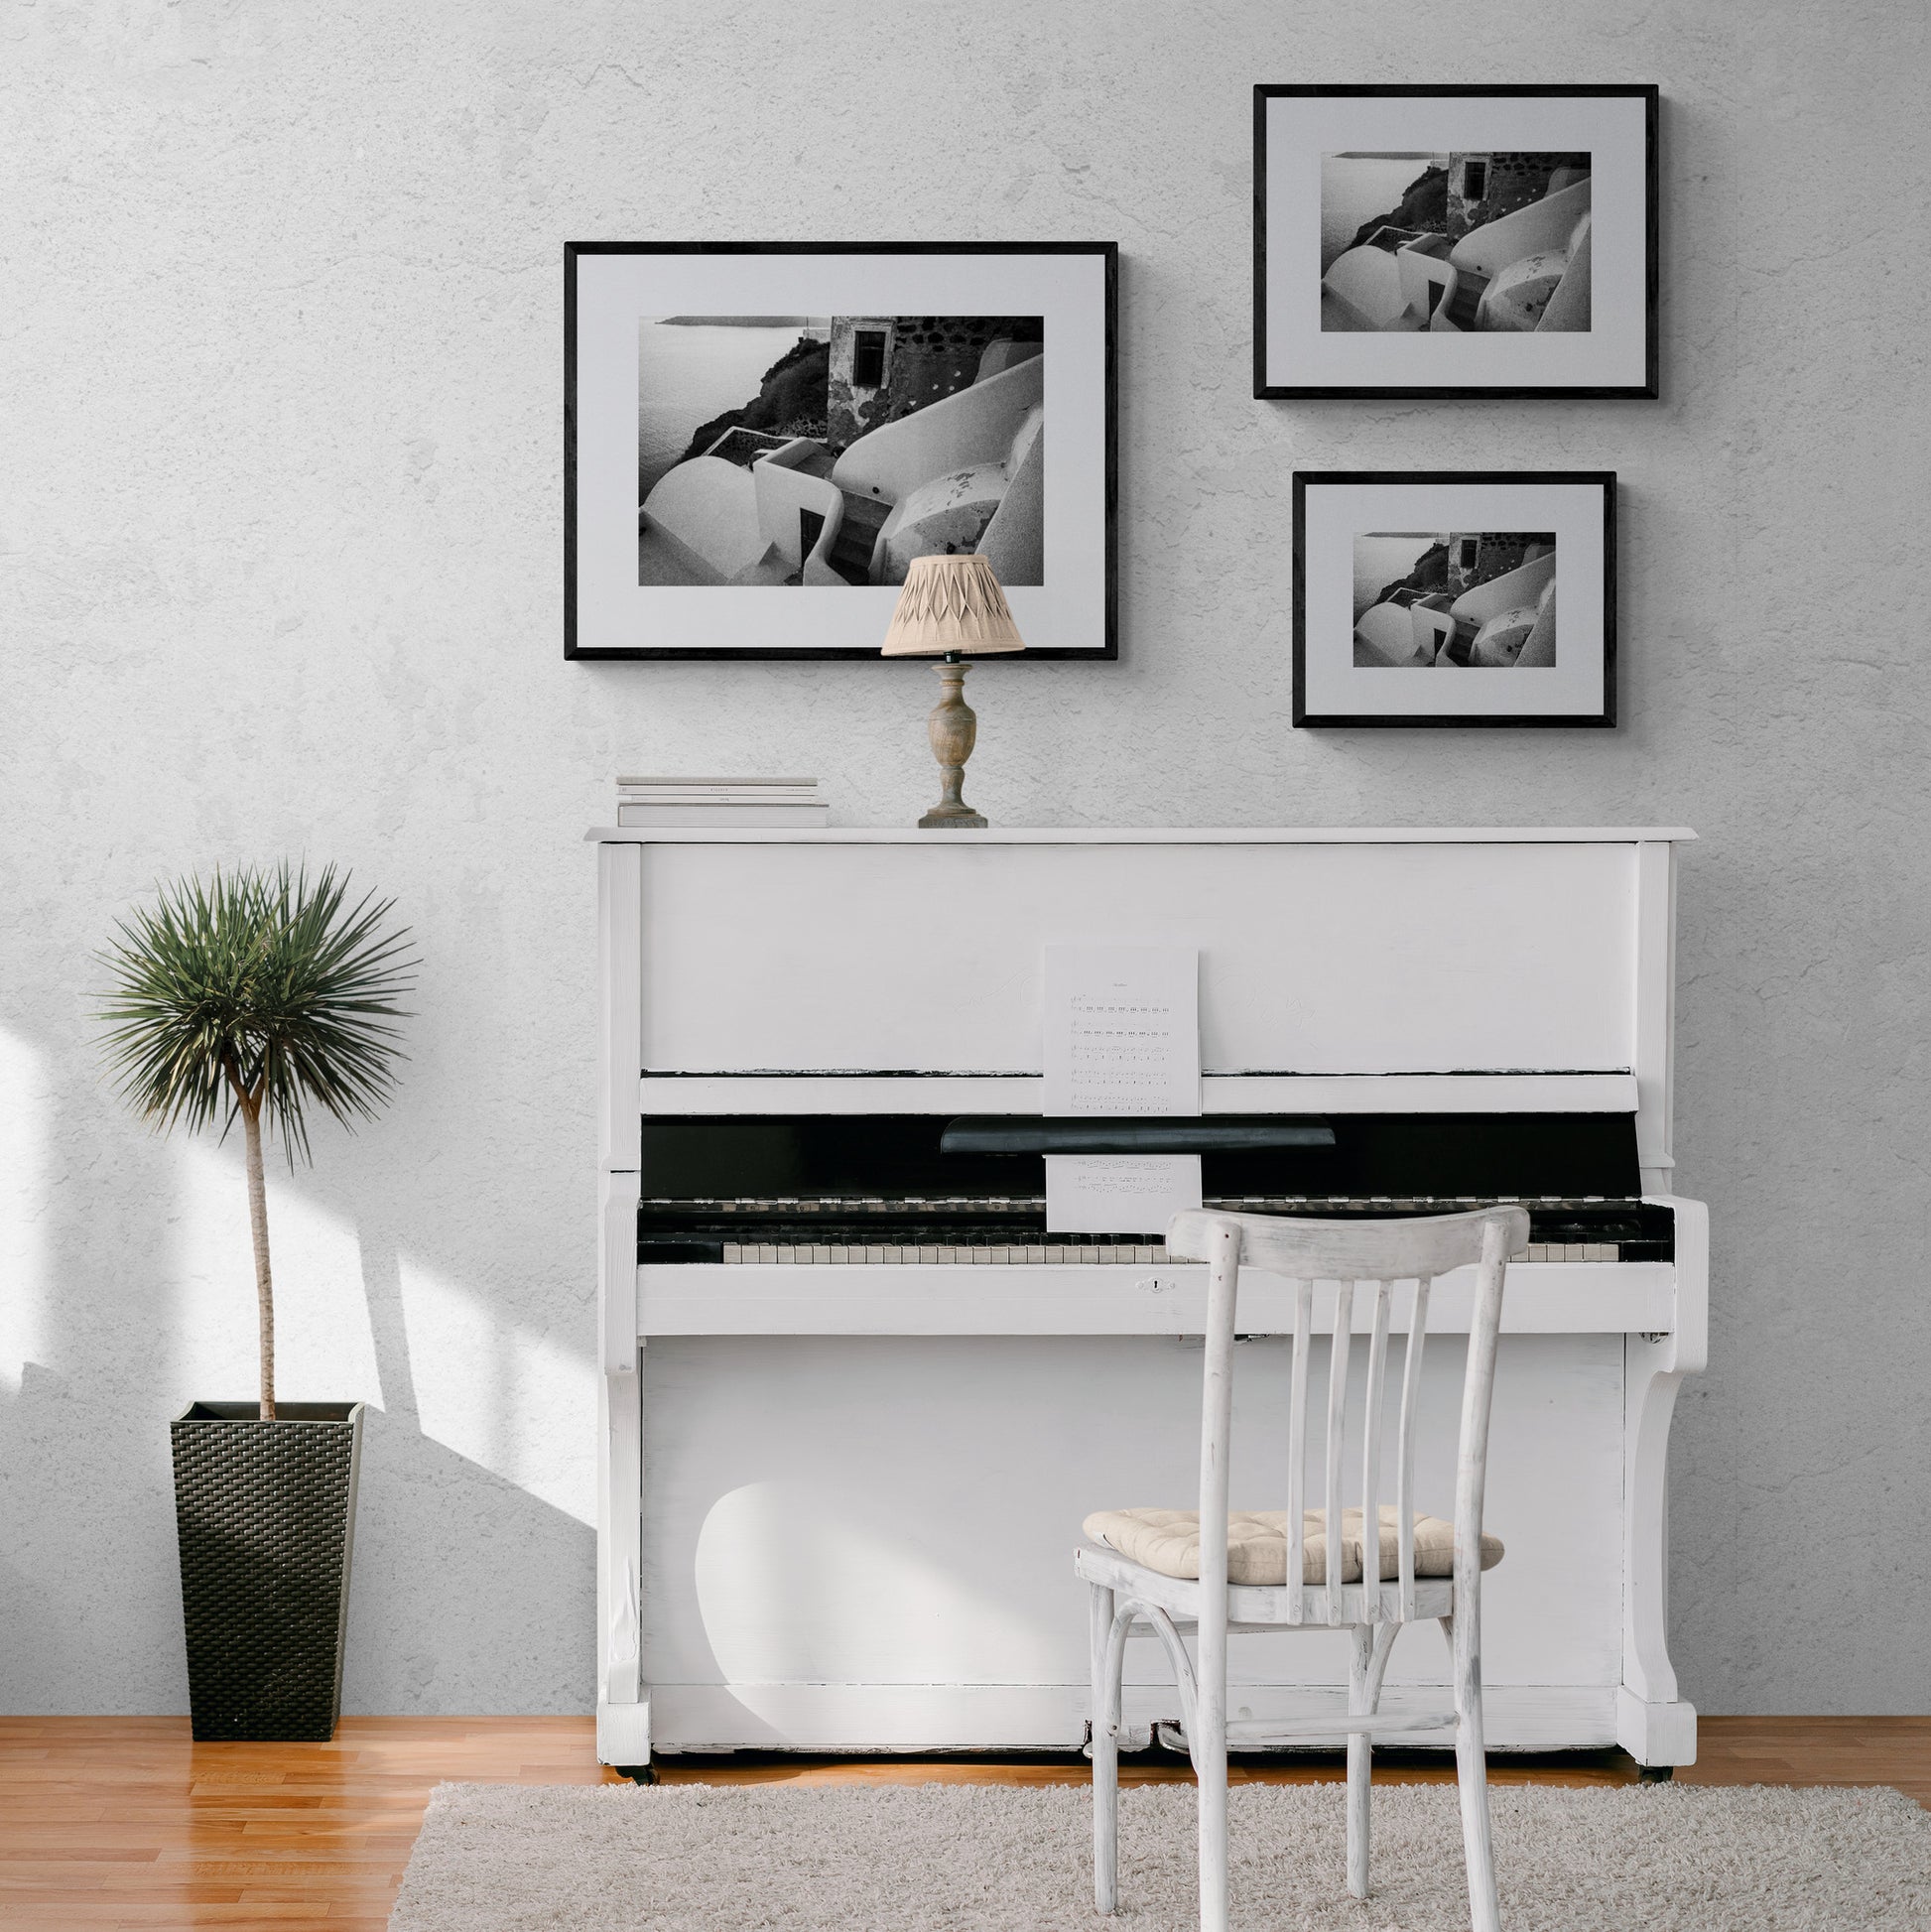 House Forms in Oia | Santorini | Chorōs | Black-and-white wall art photography from Greece - framing options